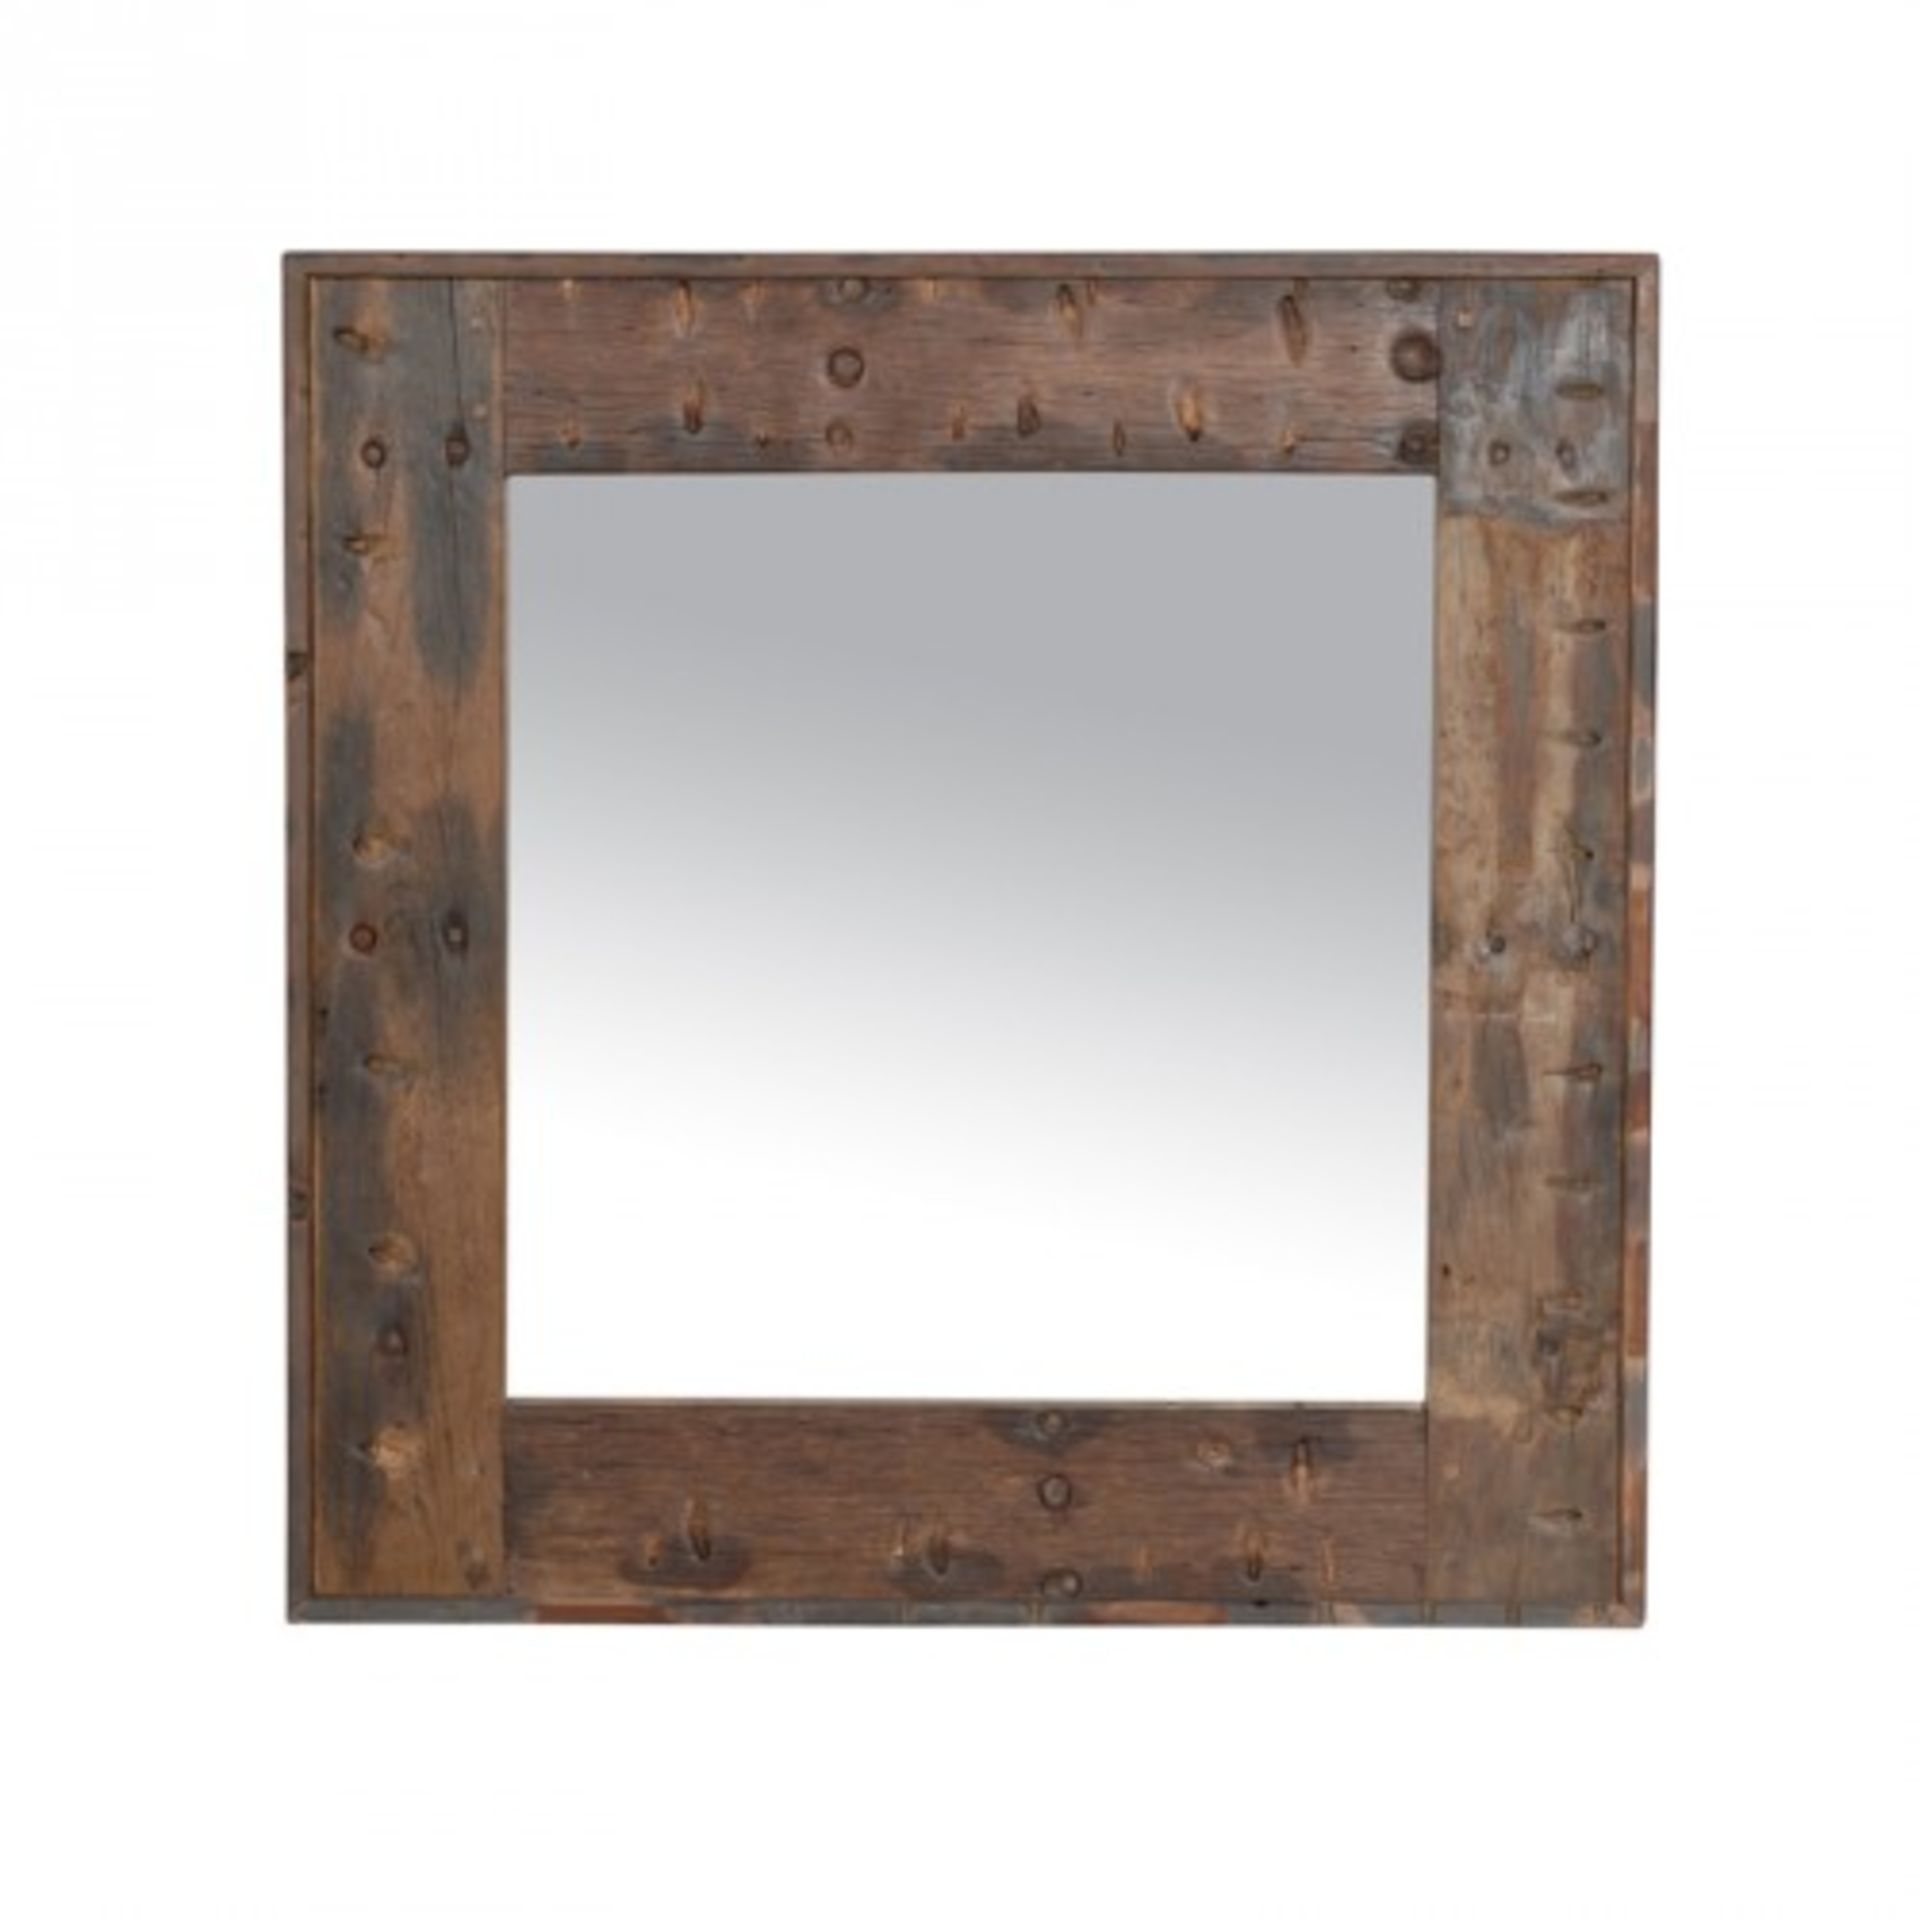 Axel Square Mirror Natural The Axel Mirror Crosses Old World And Industrial With Its Combination